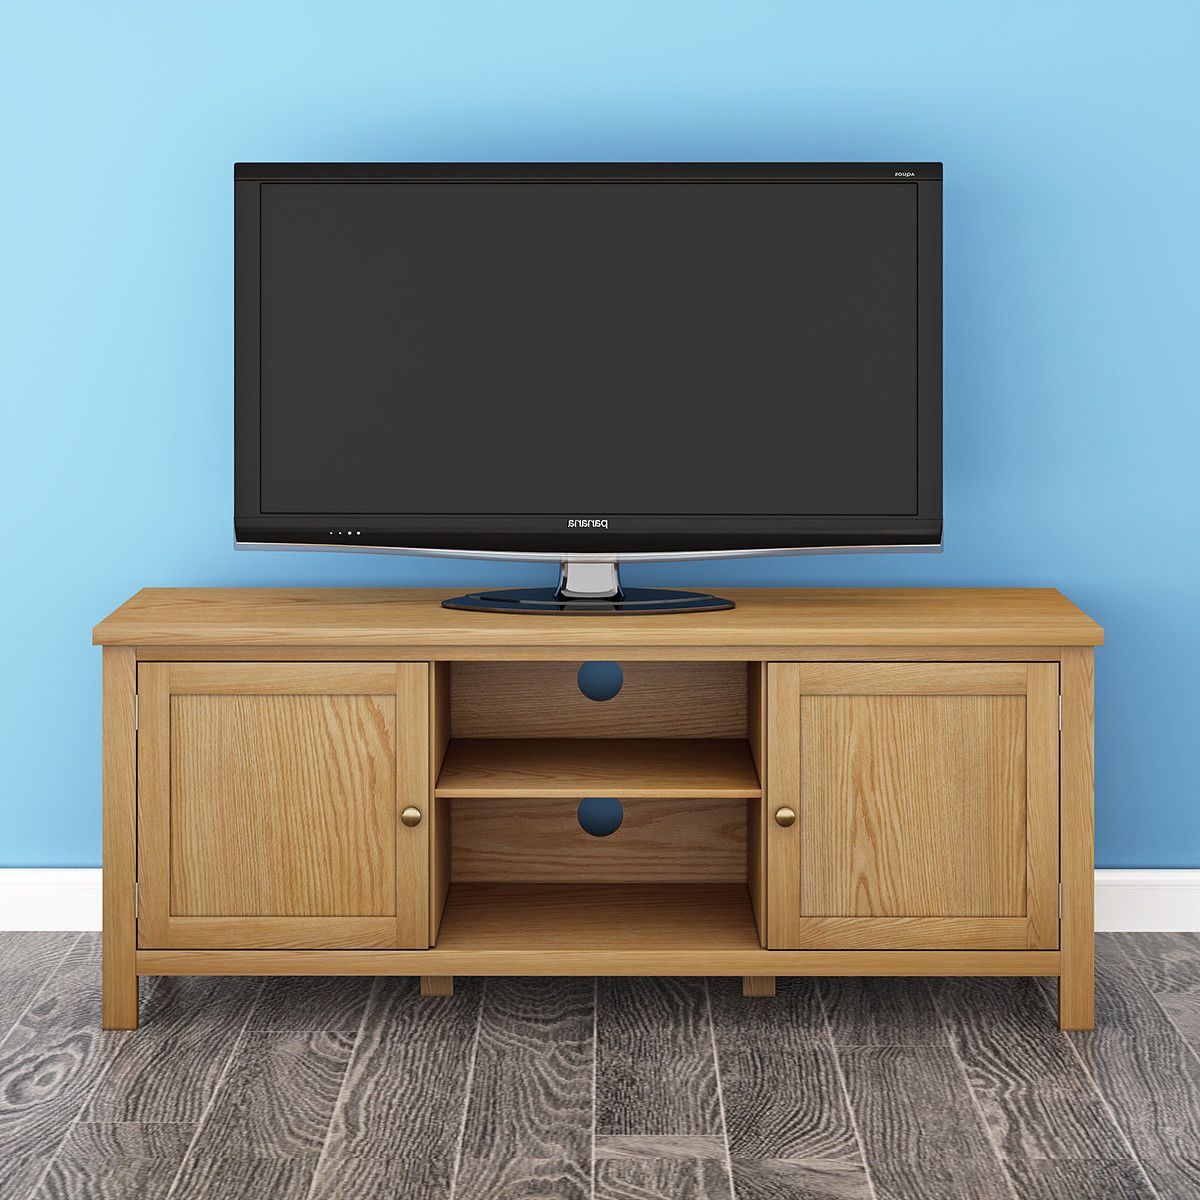 Modern Tv Stands For Flat Screens Cabinet Designs Living Room Stand Throughout Best And Newest Modern Tv Stands For Flat Screens (View 19 of 20)